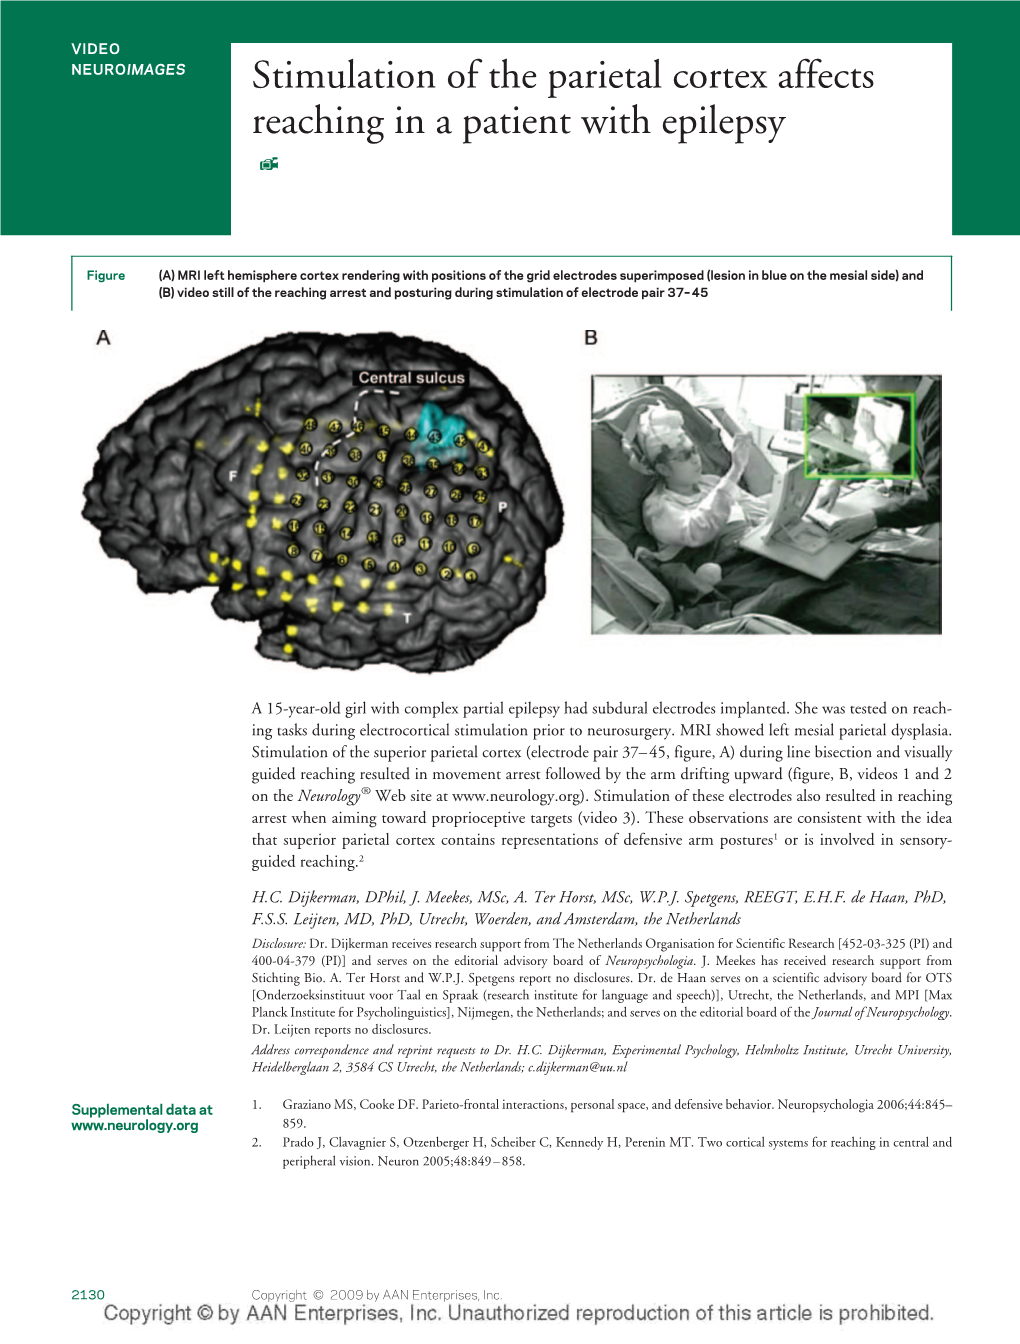 Stimulation of the Parietal Cortex Affects Reaching in a Patient with Epilepsy